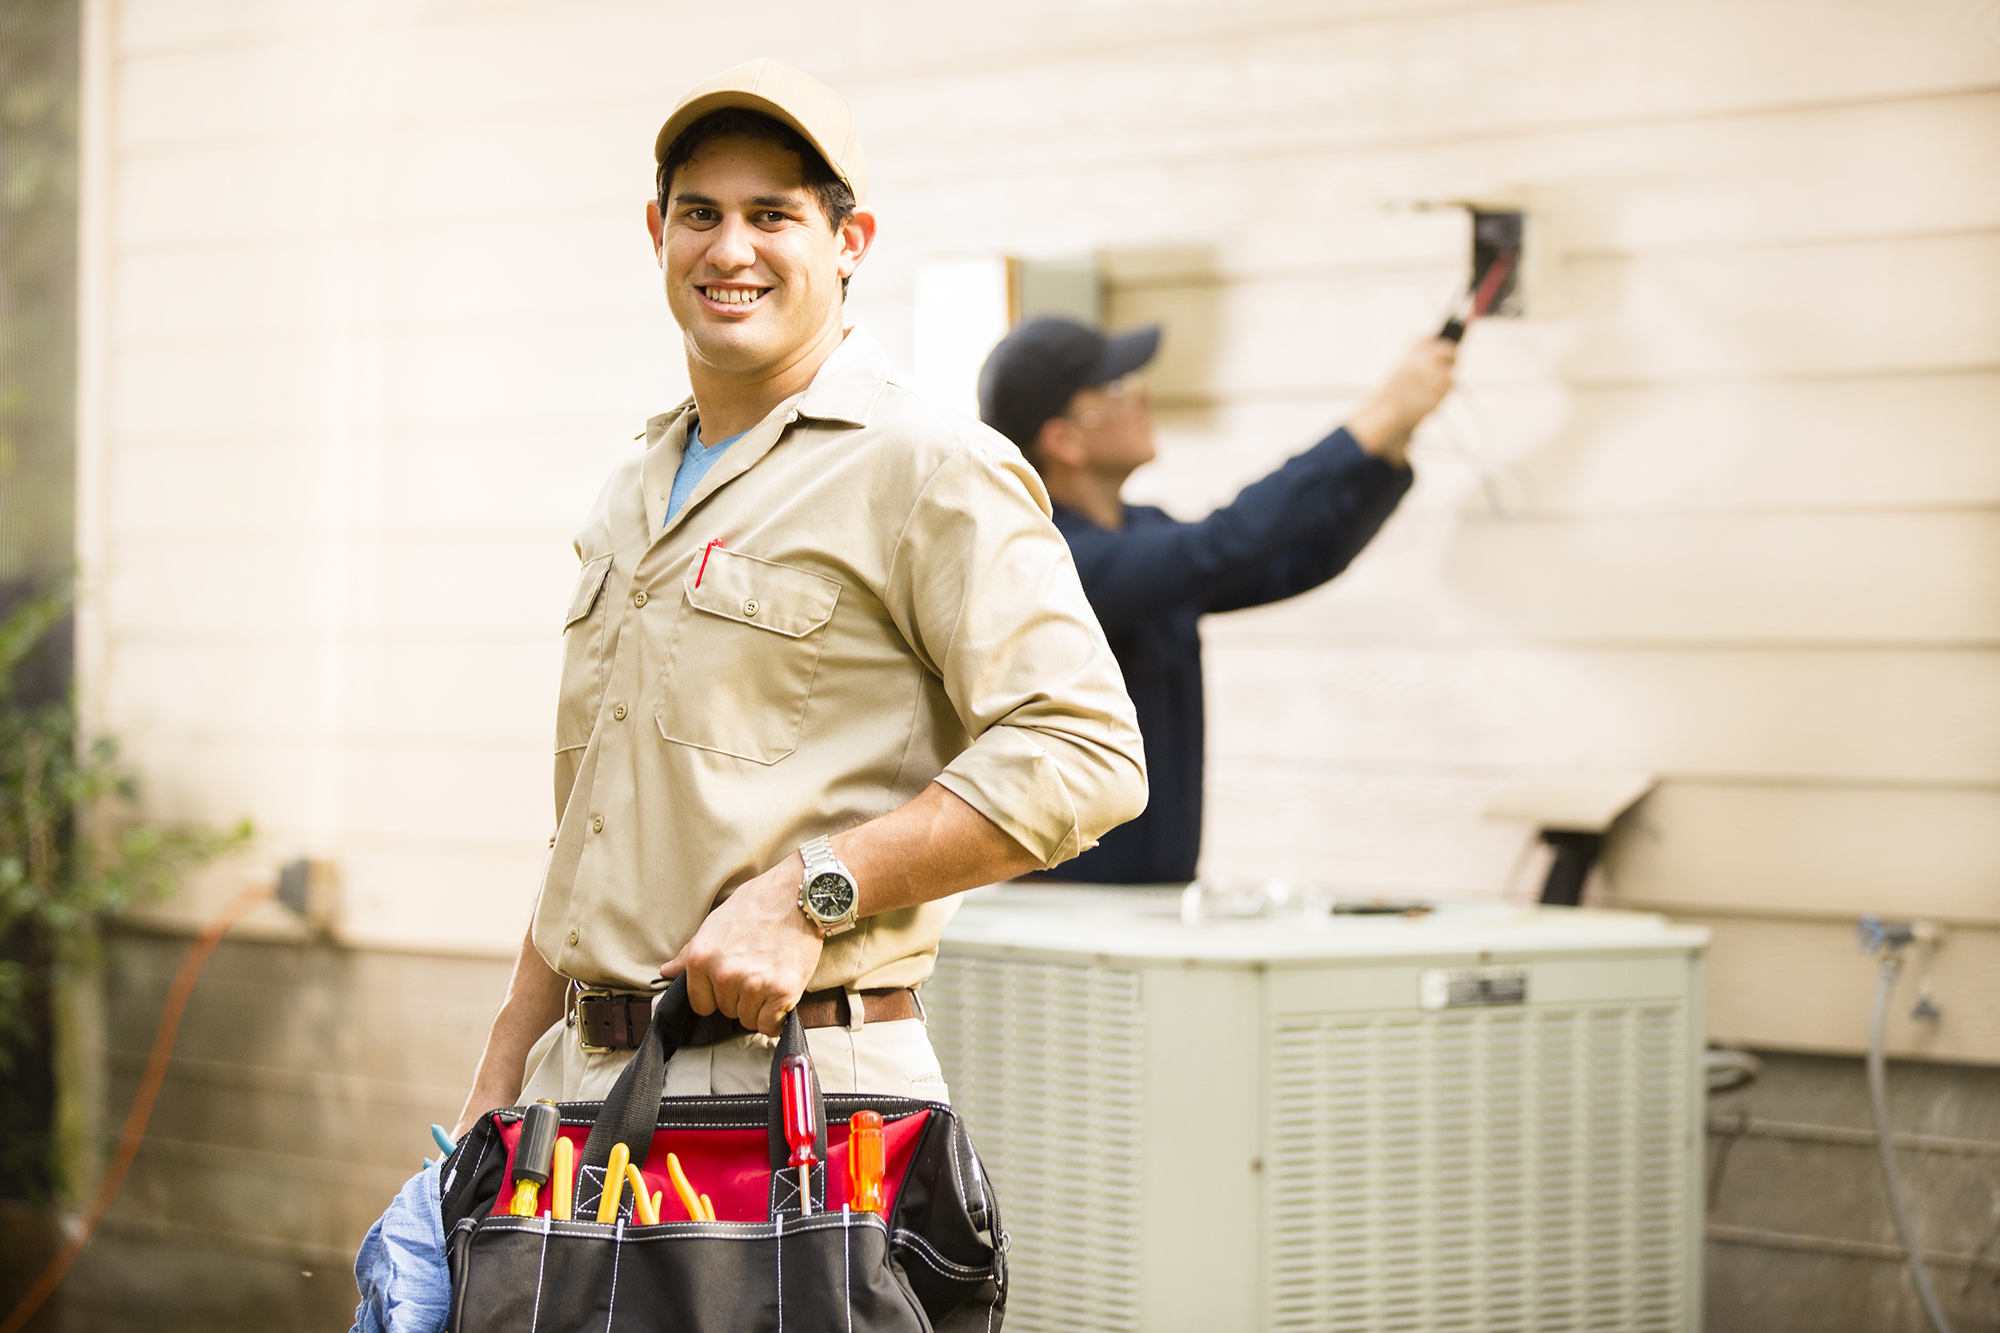 A person holding a tool belt with a person working on the siding of a house in the background.